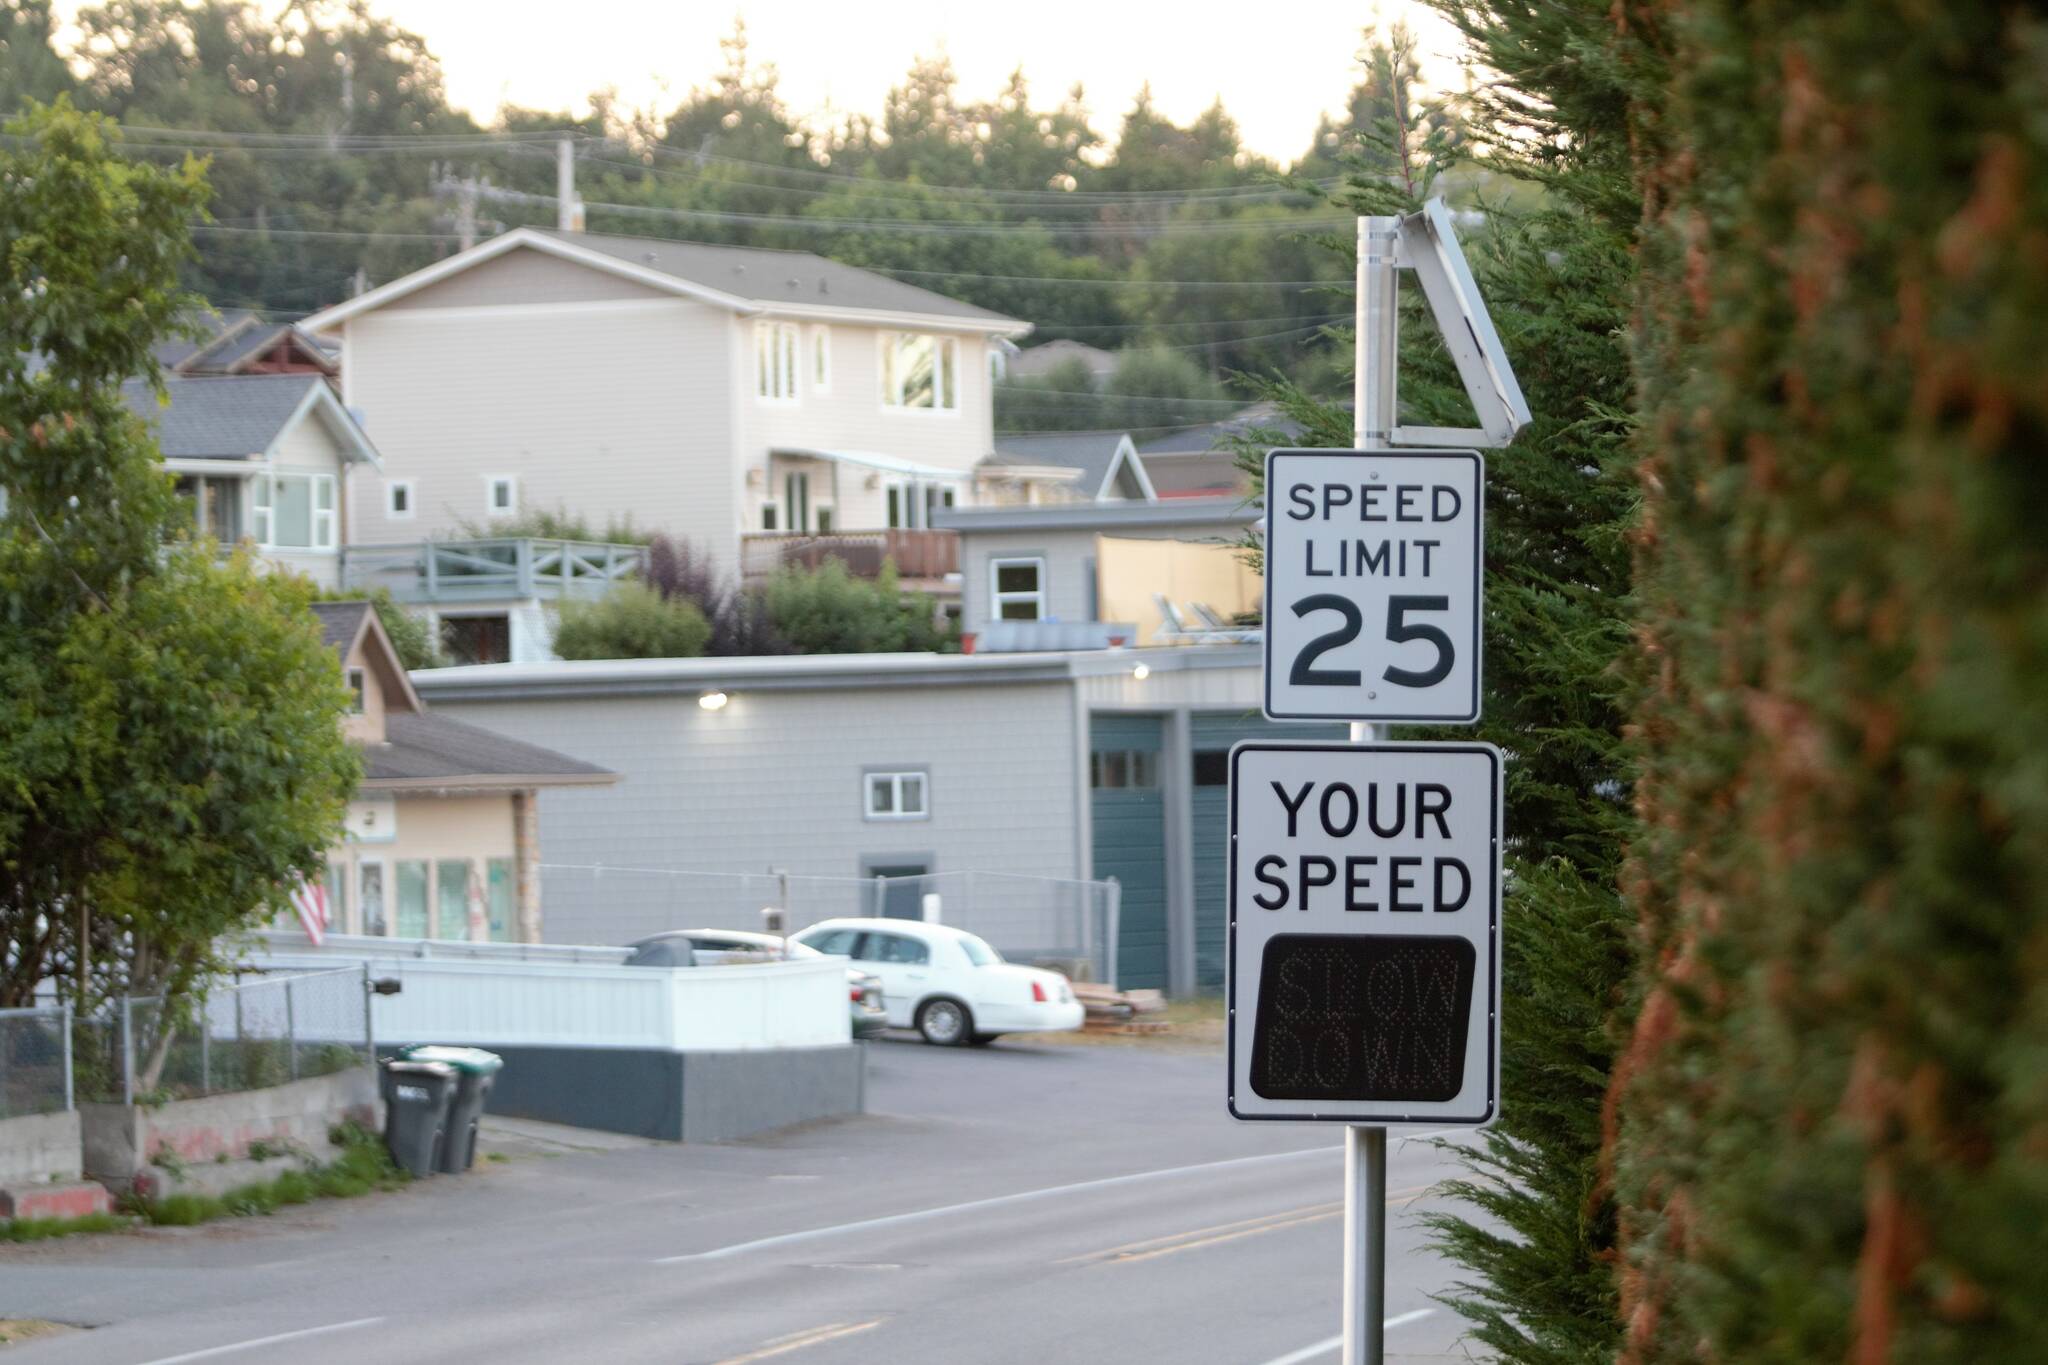 This speed feedback sign, located in the heart of Manchester off Colchester Drive, is reportedly only doing so much to deter the increasing number of speeders through the community. Elisha Meyer/Kitsap News Group